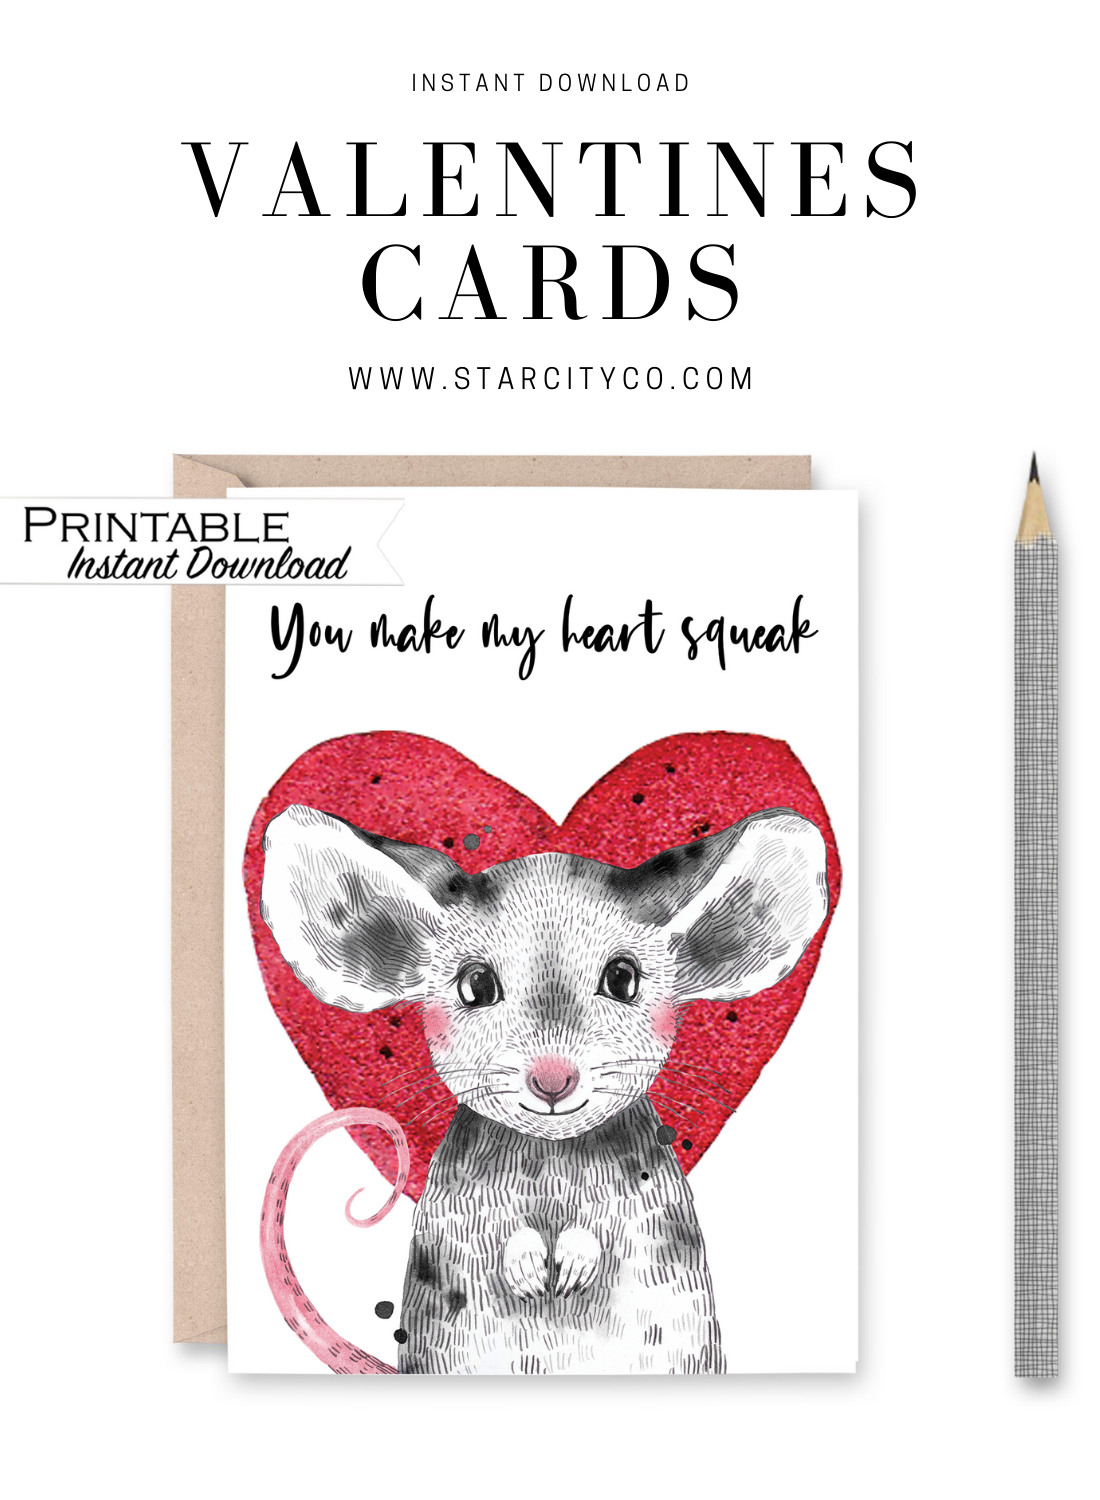 You Make my Heart Squeak Mouse Anniversary or Kids Valentines Card Printable - Digital Download